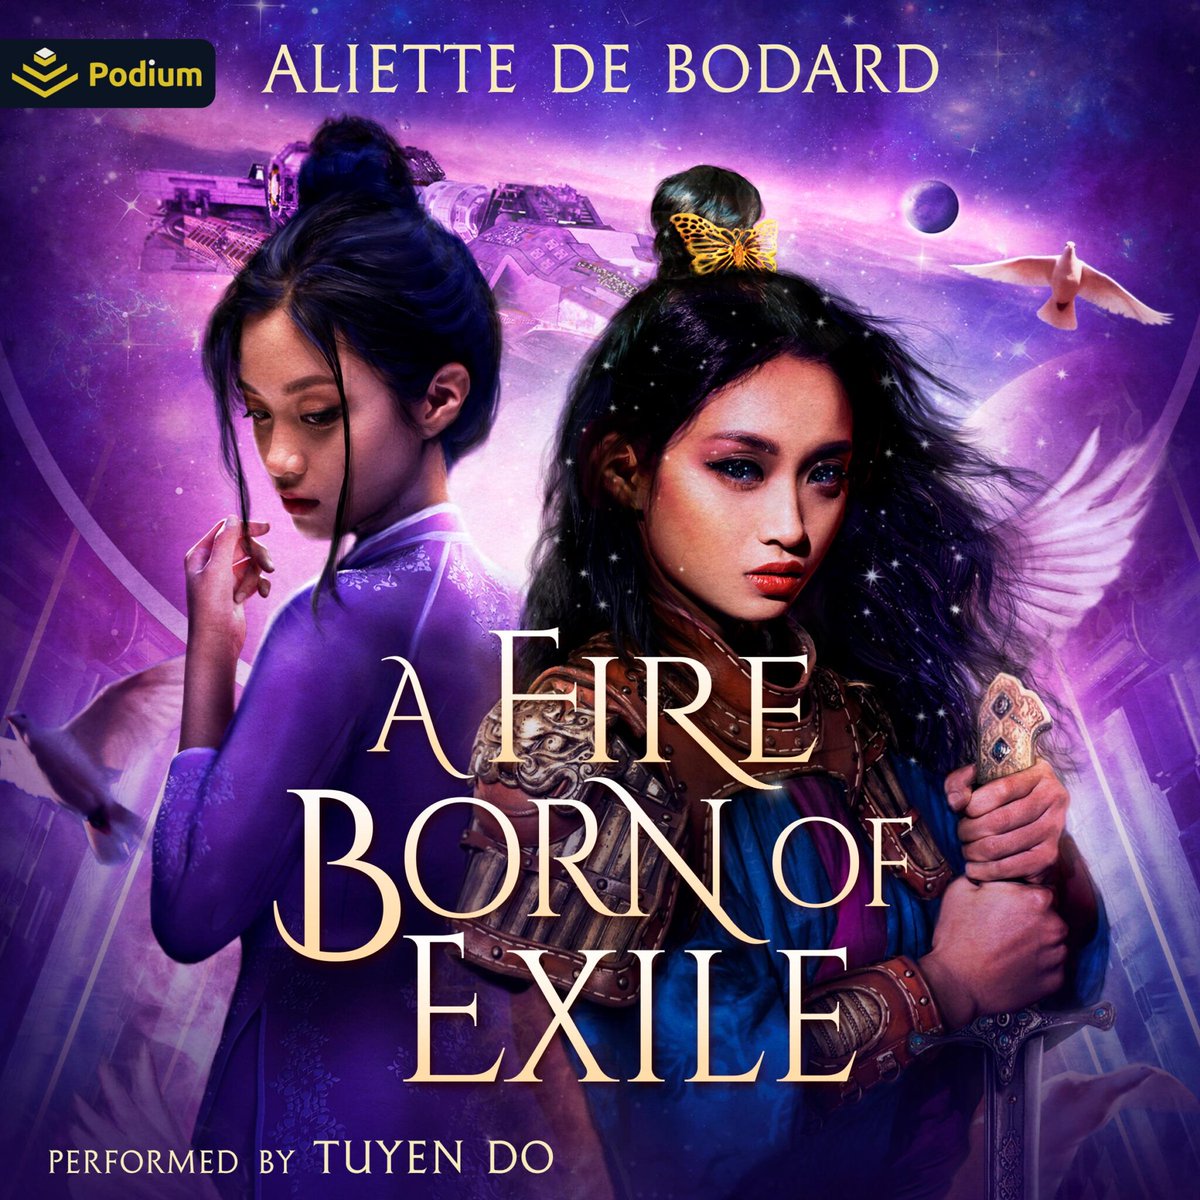 .@aliettedb's A FIRE BORN OF EXILE is available in a new North American audiobook from tomorrow! zenoagency.com/news/a-fire-bo… The author's latest acclaimed #Xuya novel - audiobook published by @PodiumAudio; narrated by Tuyen Do.